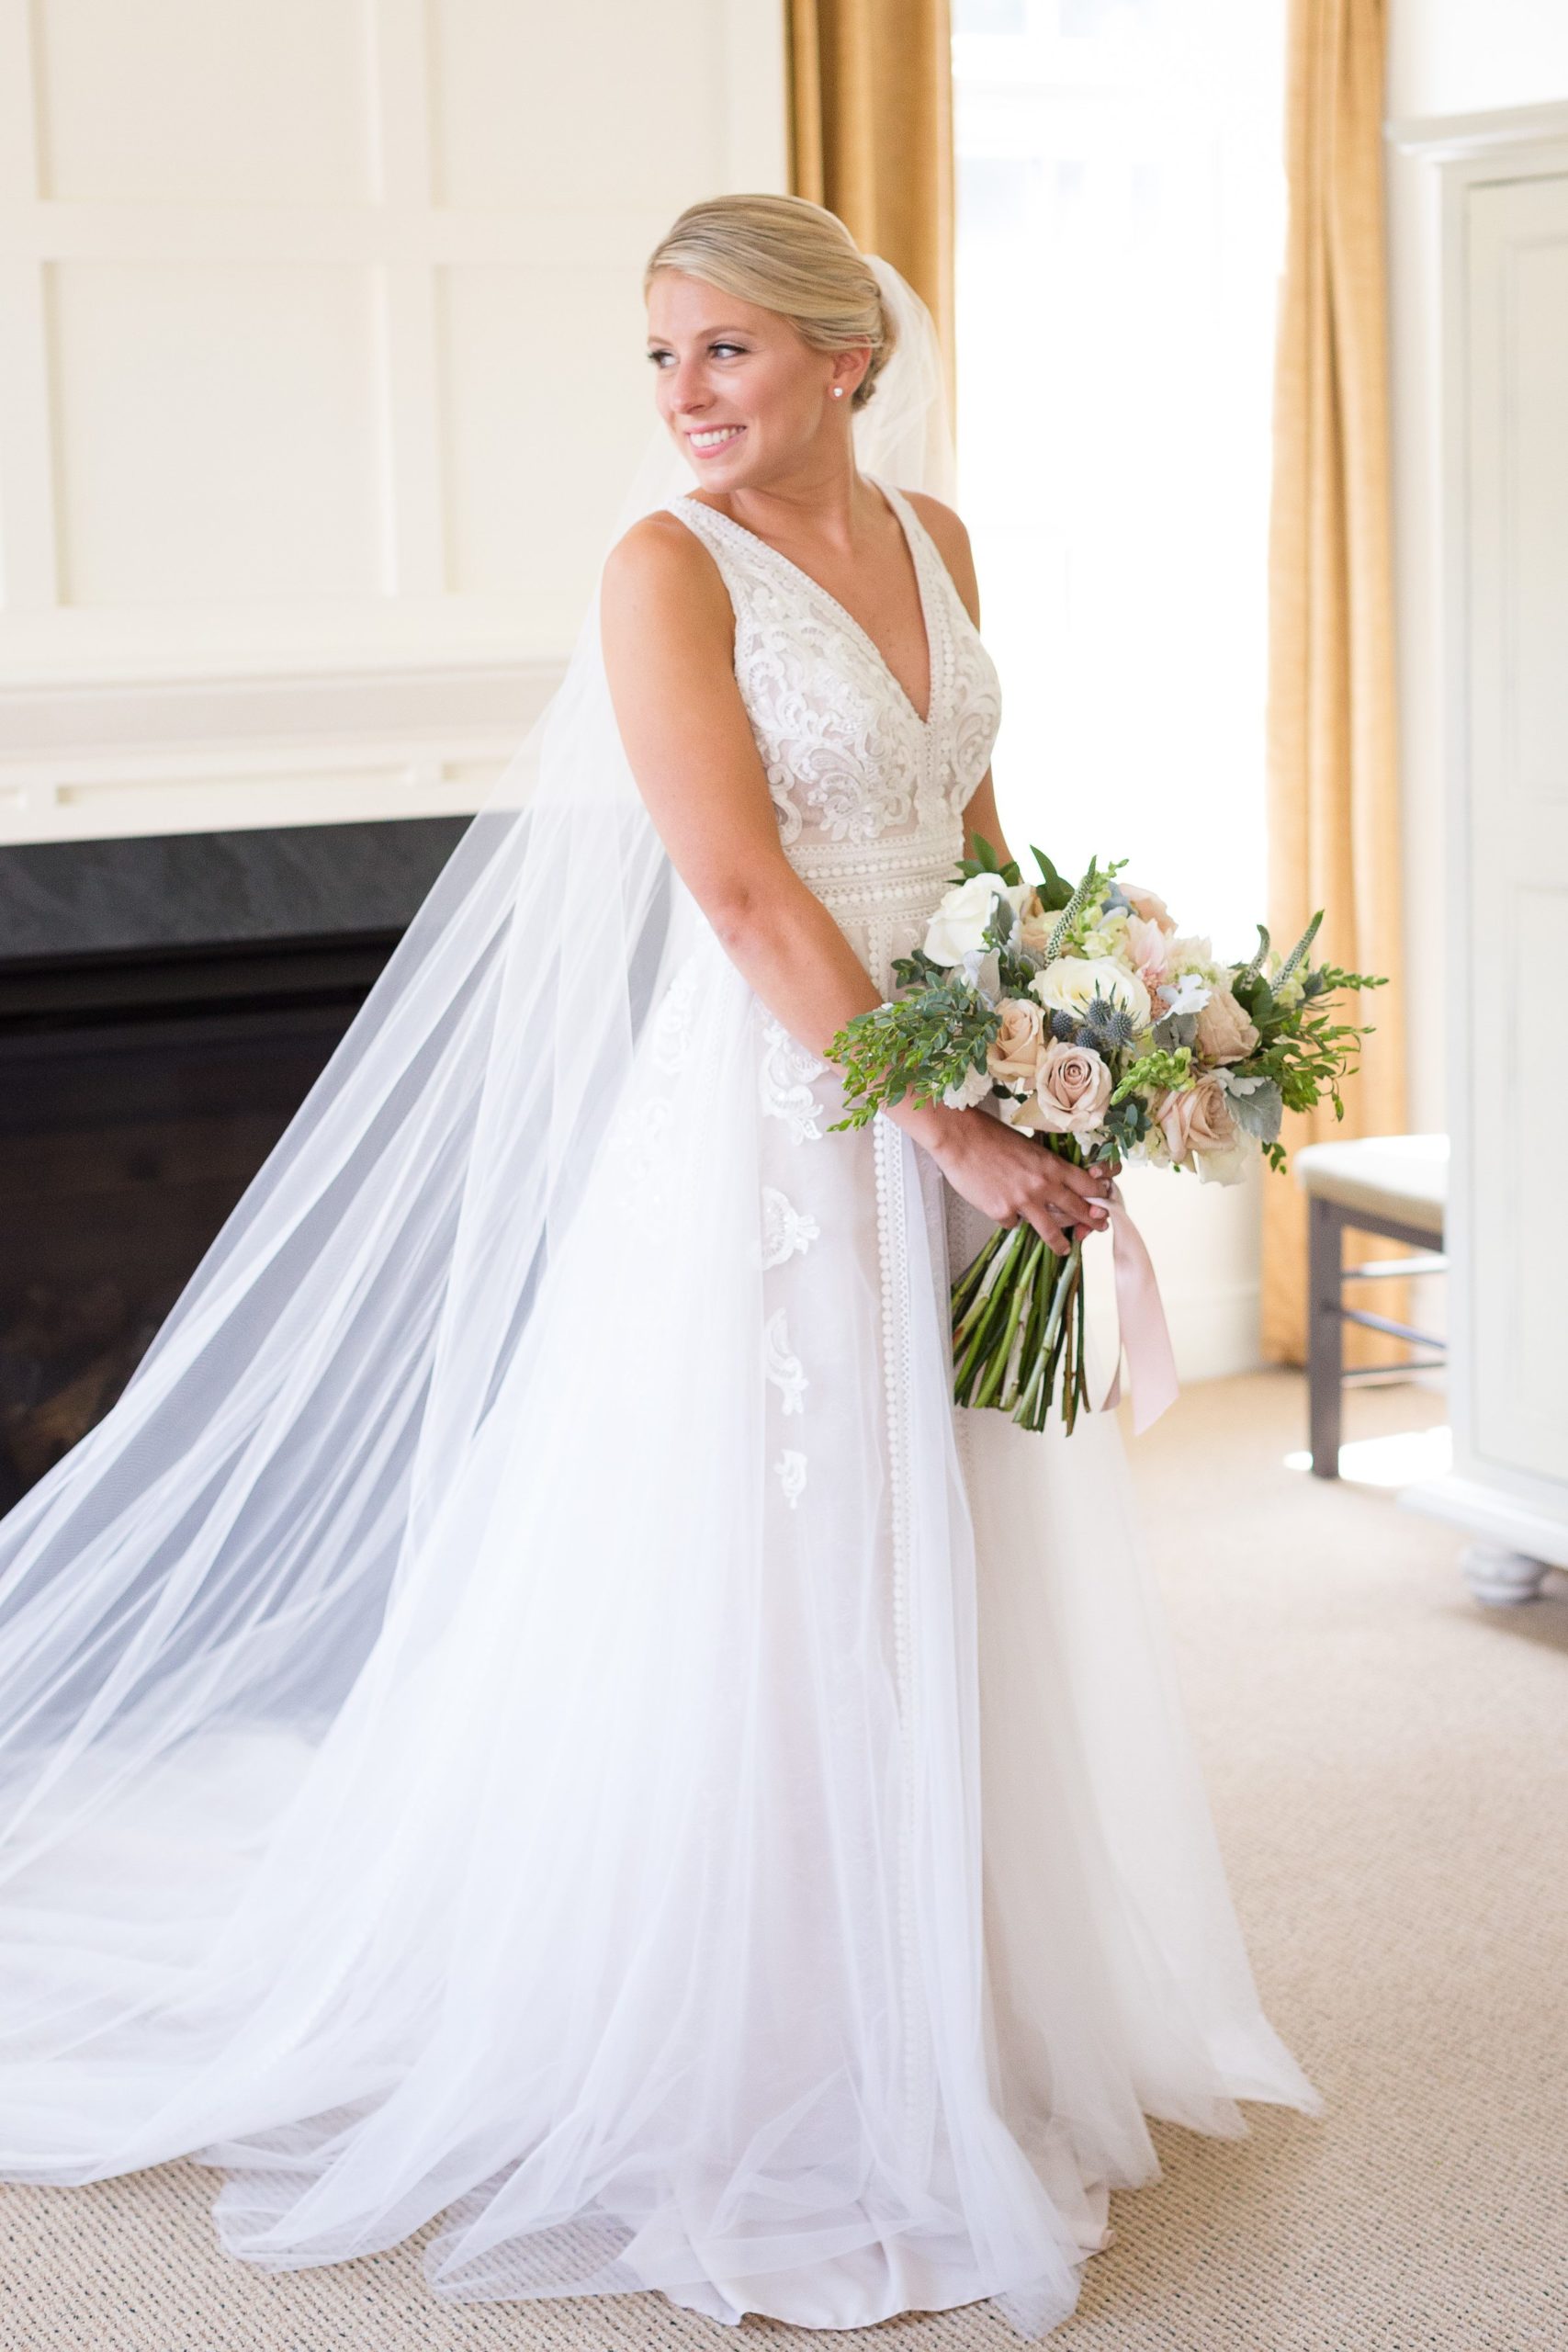 Bride portrait while getting ready for Vermont summer wedding